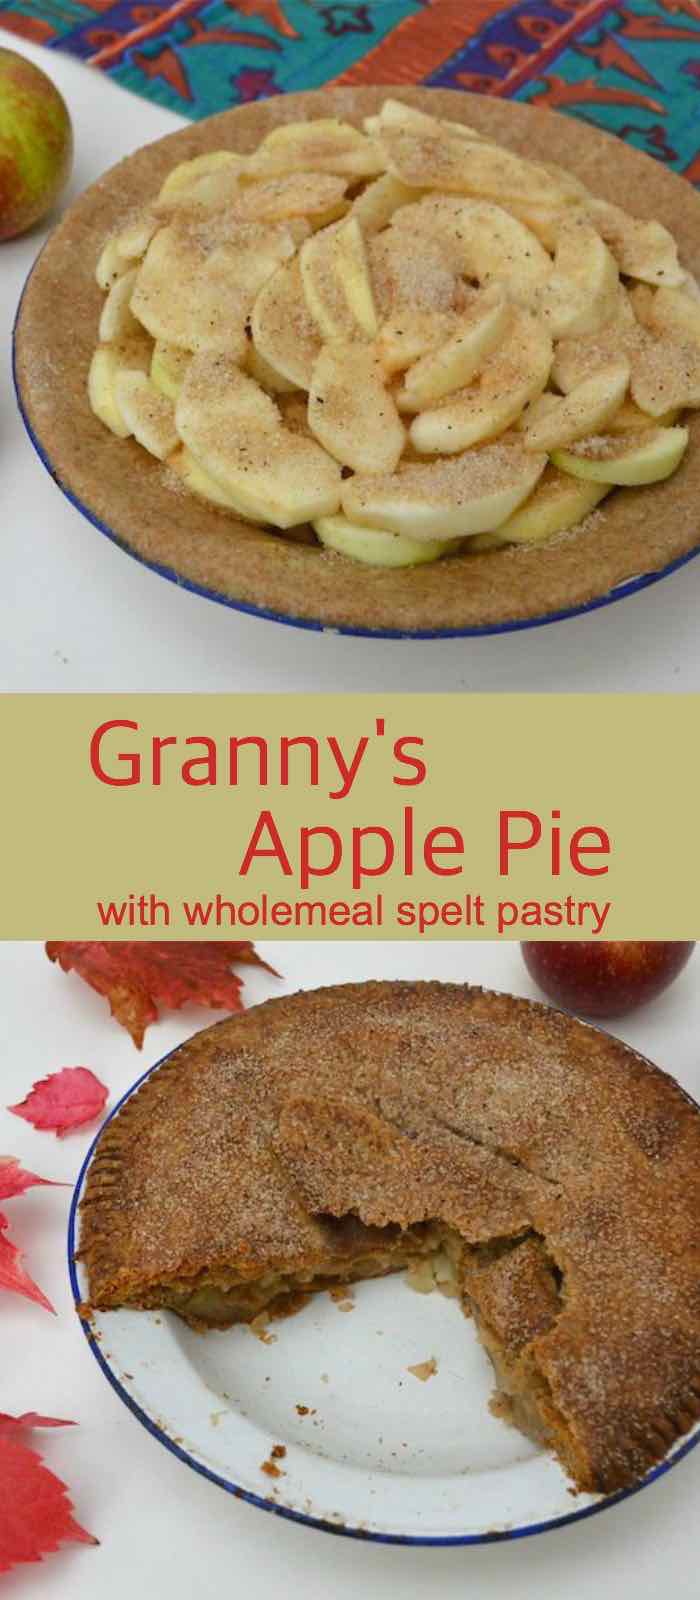 Granny's apple pie before the pastry lid goes on and once baked. Text reads "Granny's Apple Pie with wholemeal spelt pastry".